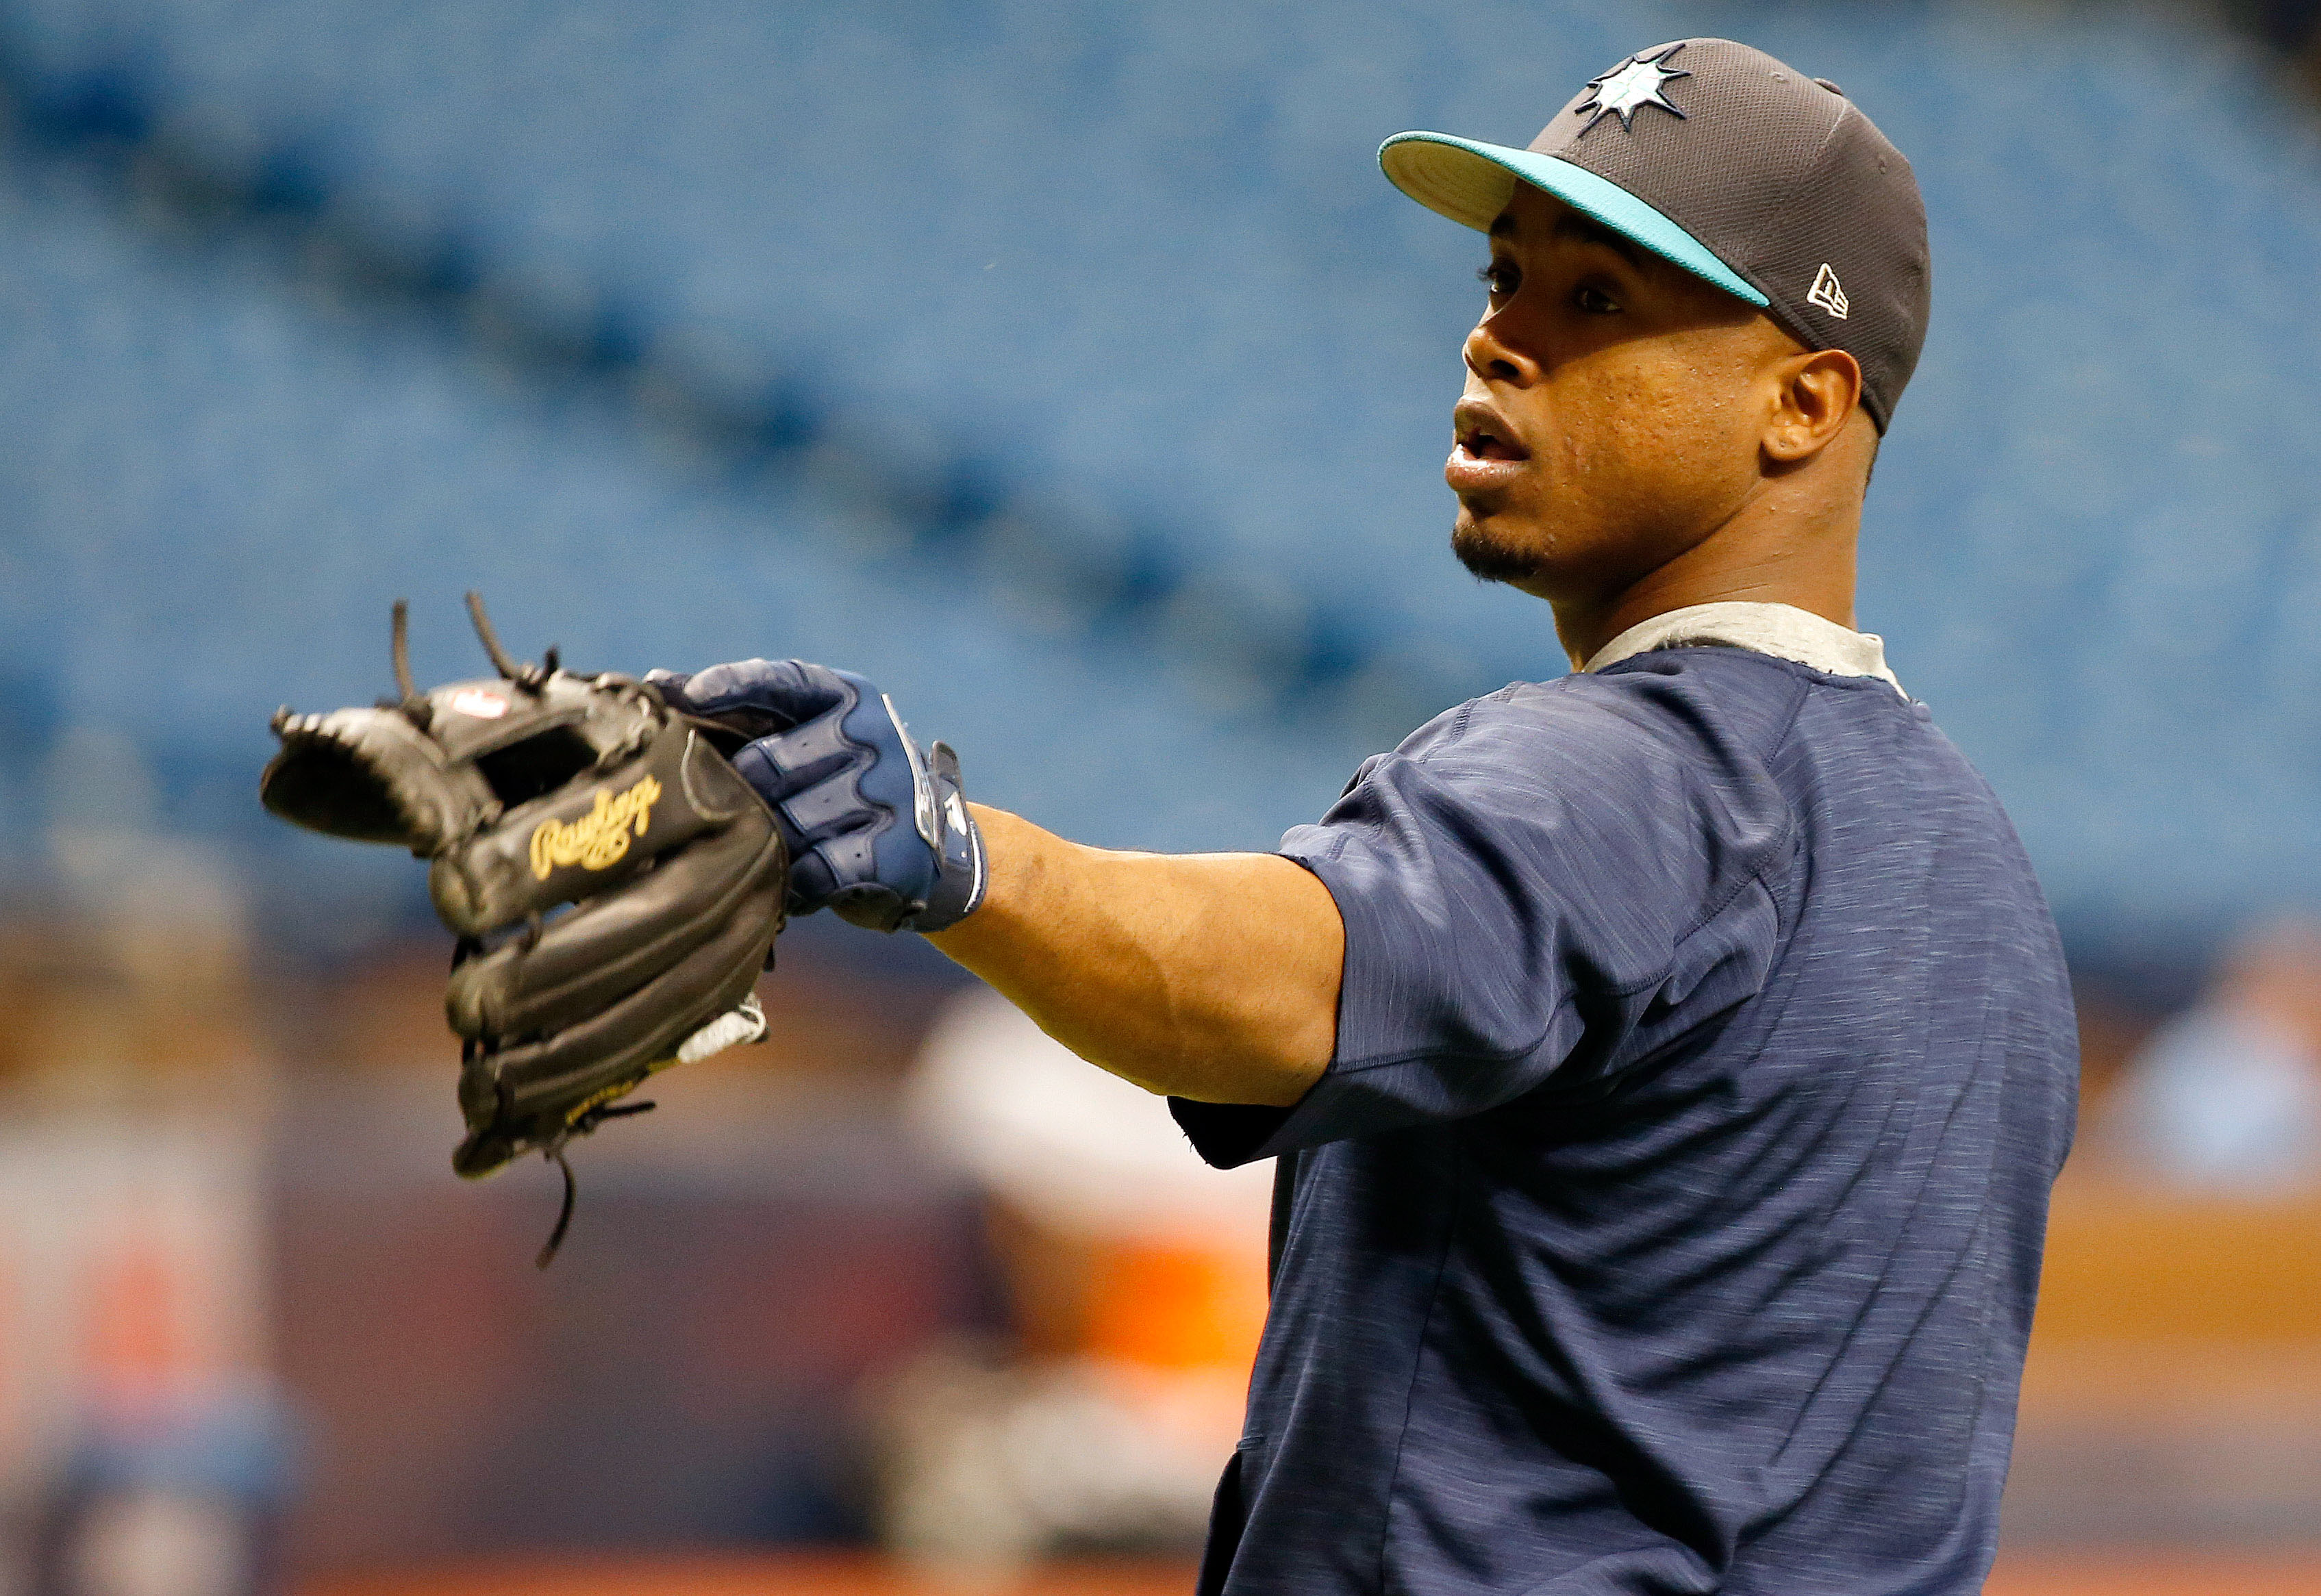 Jean Segura Says He Was Robbed, Beaten by Police in the Dominican Republic